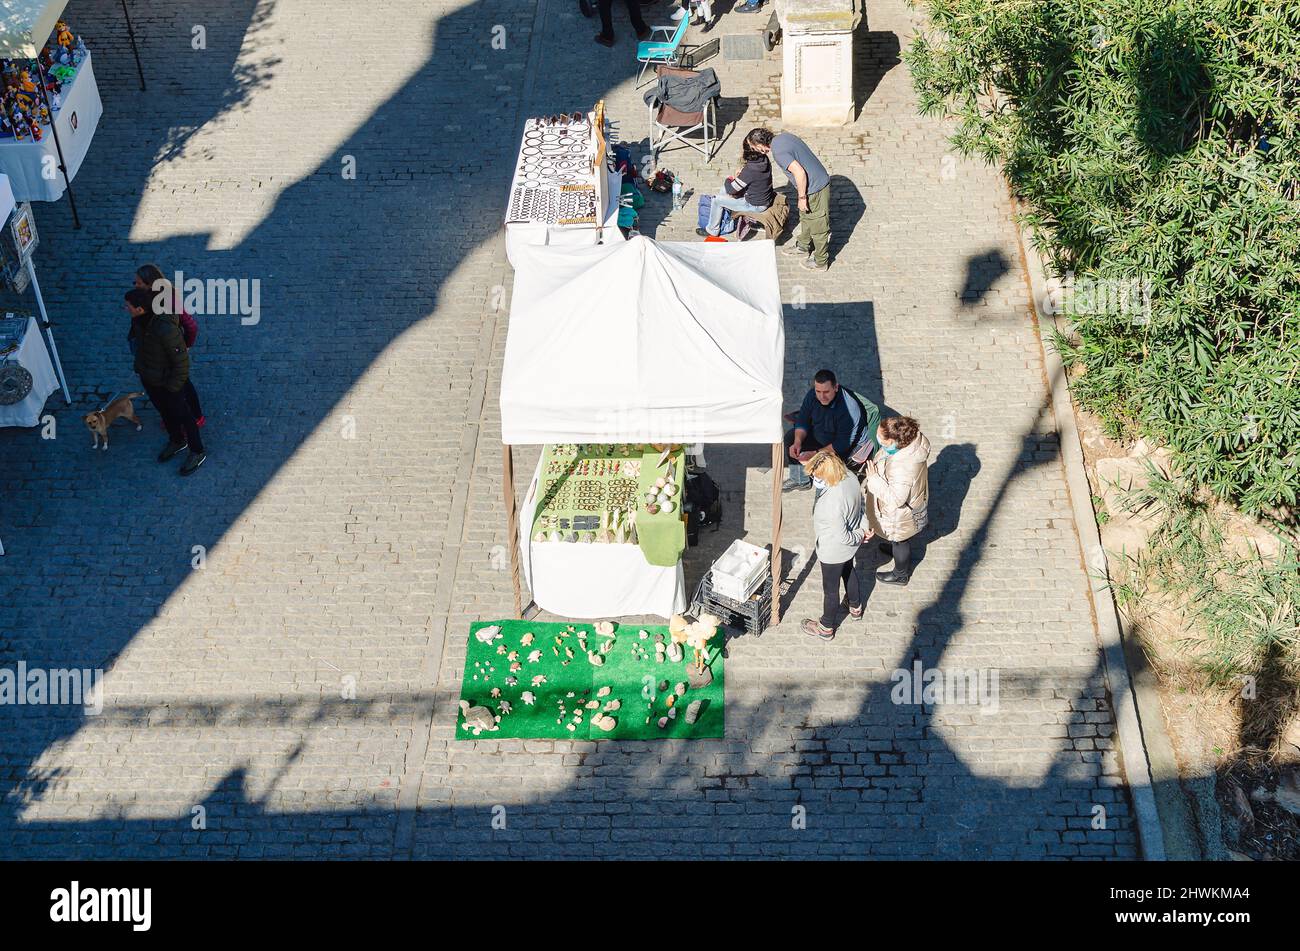 Top view of an open air market Stock Photo